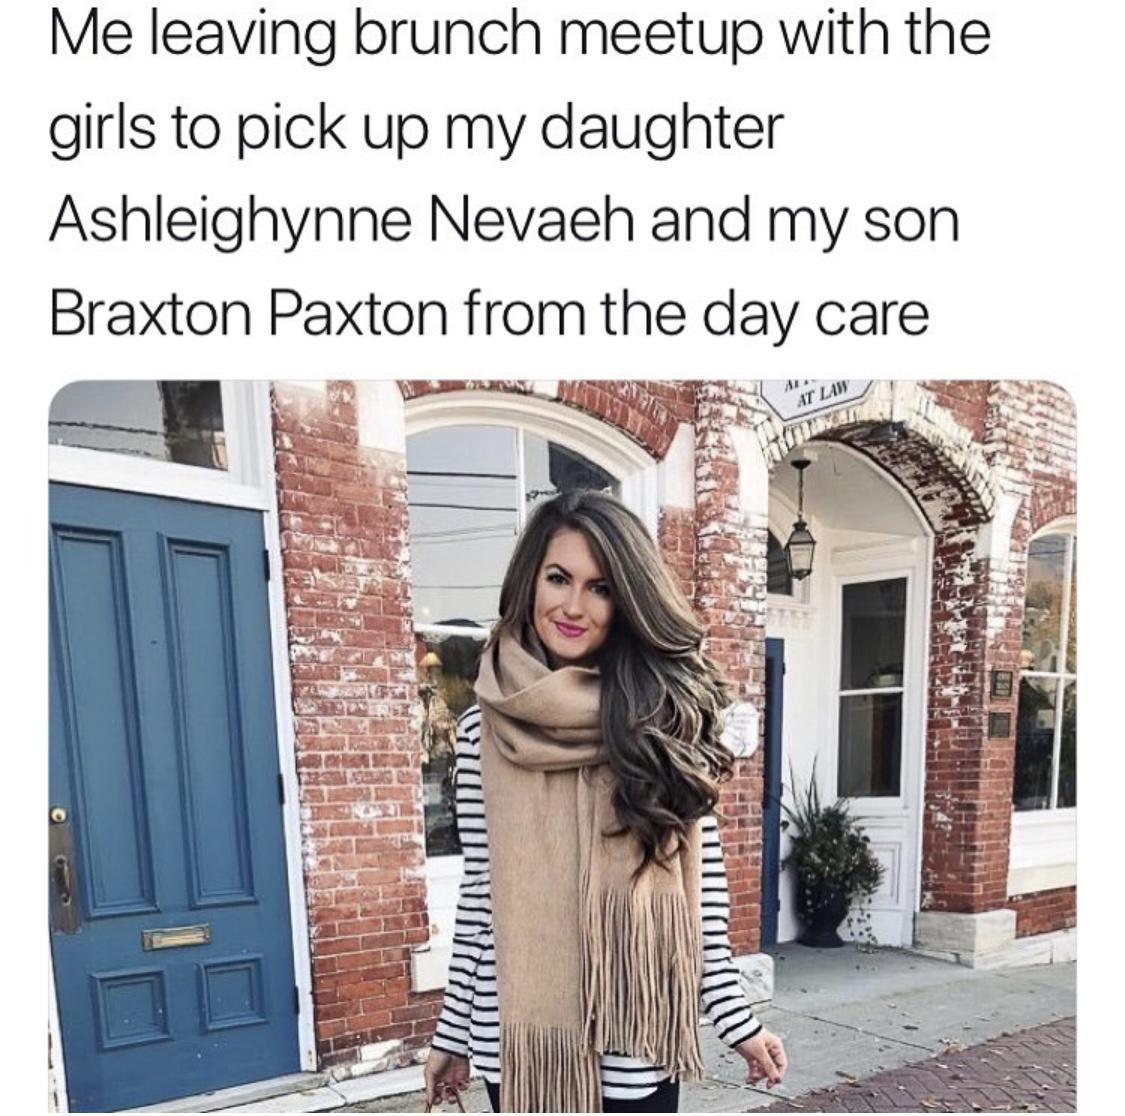 Fresh Pics And Memes - fur - Me leaving brunch meetup with the girls to pick up my daughter Ashleighynne Nevaeh and my son Braxton Paxton from the day care Grum At Law